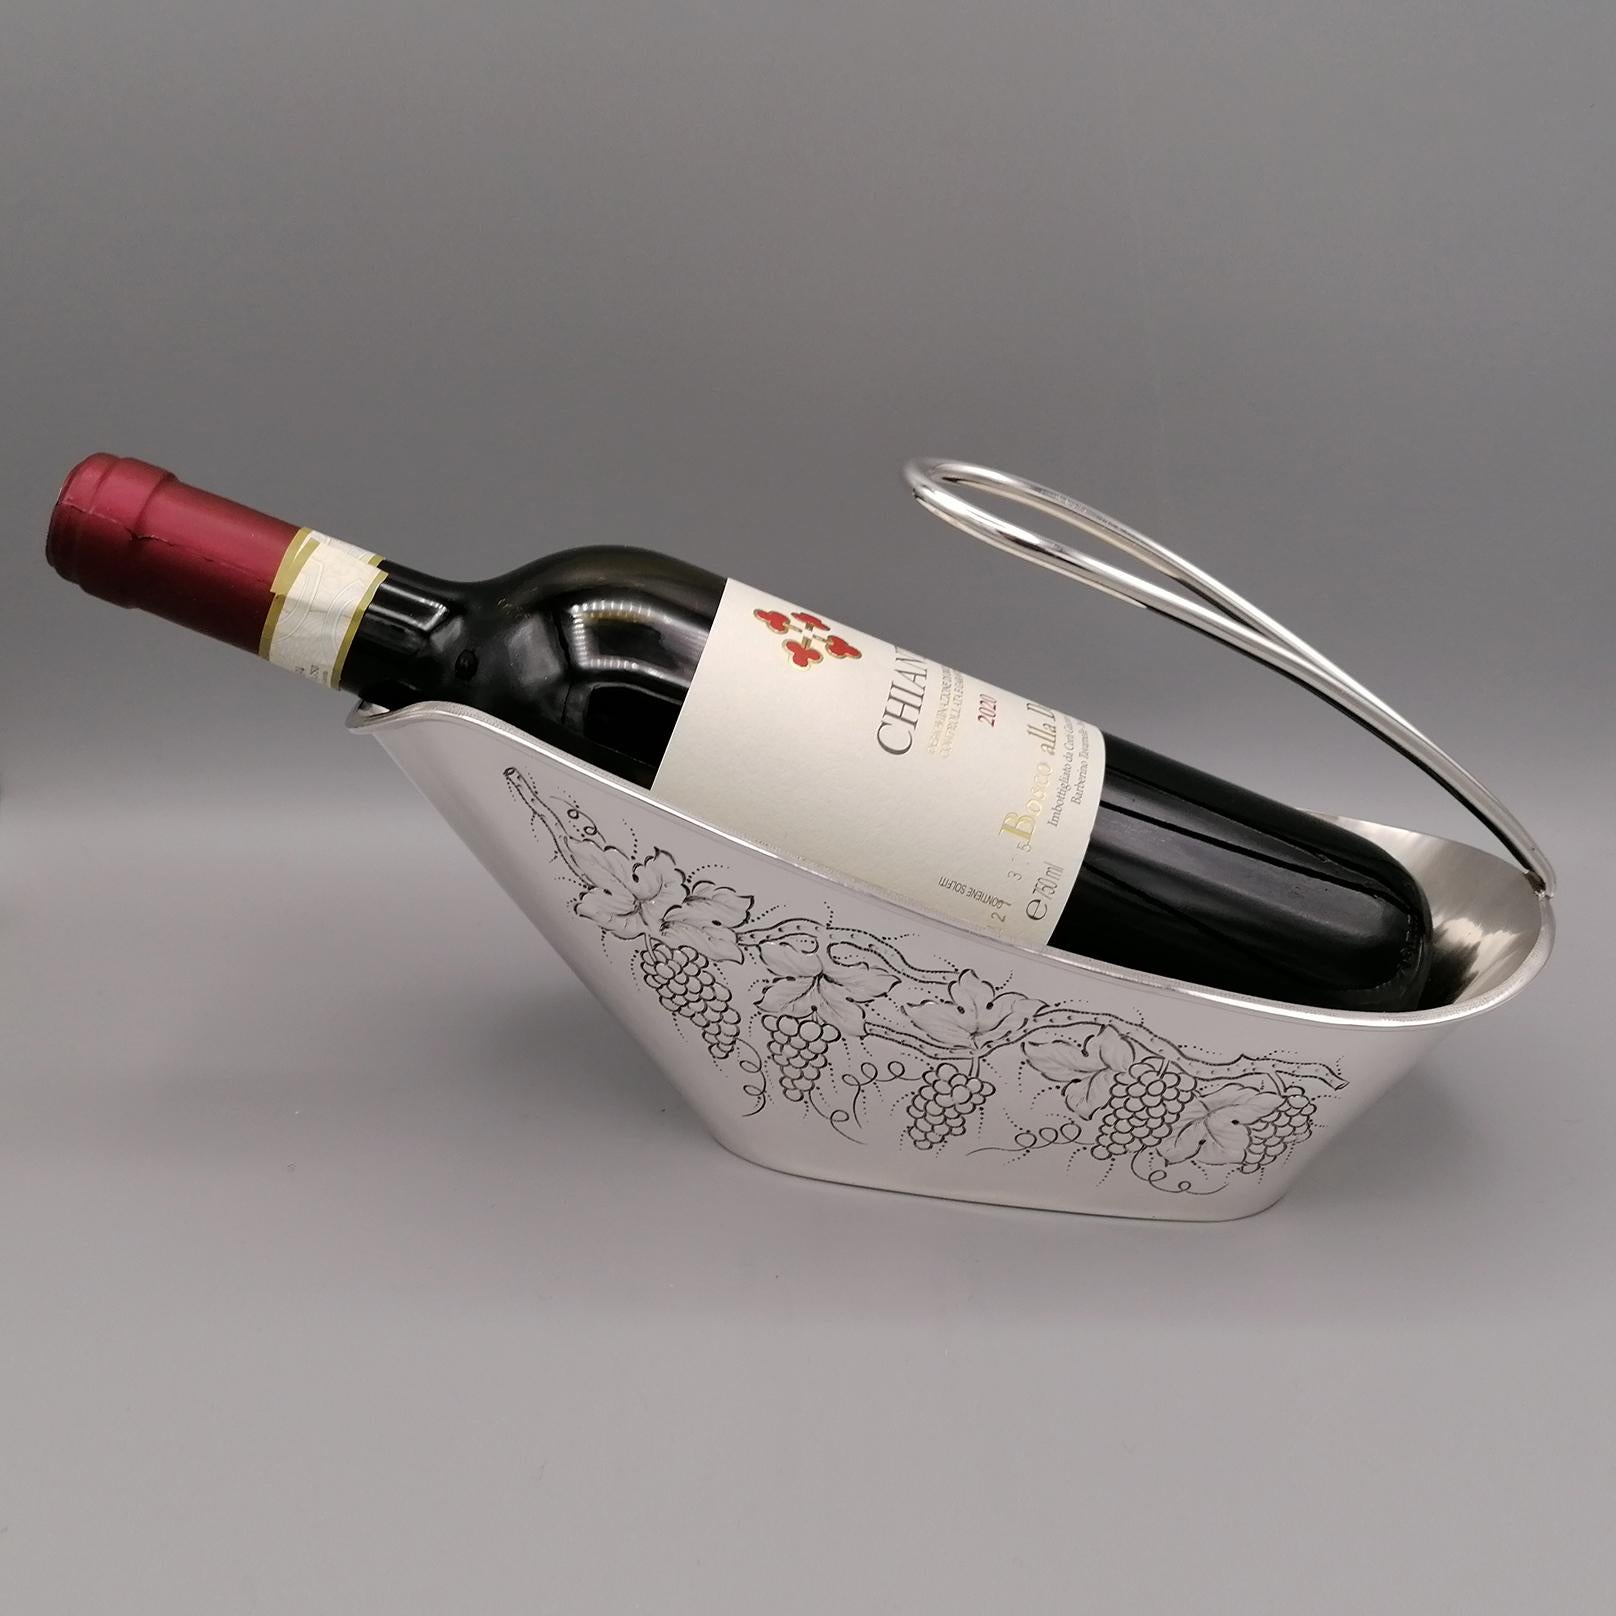 Italy, a country that produces great wines and with an ancient agricultural tradition, could not fail to dedicate prestigious objects to the pouring of red wine.
This bottle holder was made of solid 800 silver and made entirely by hand with a sheet